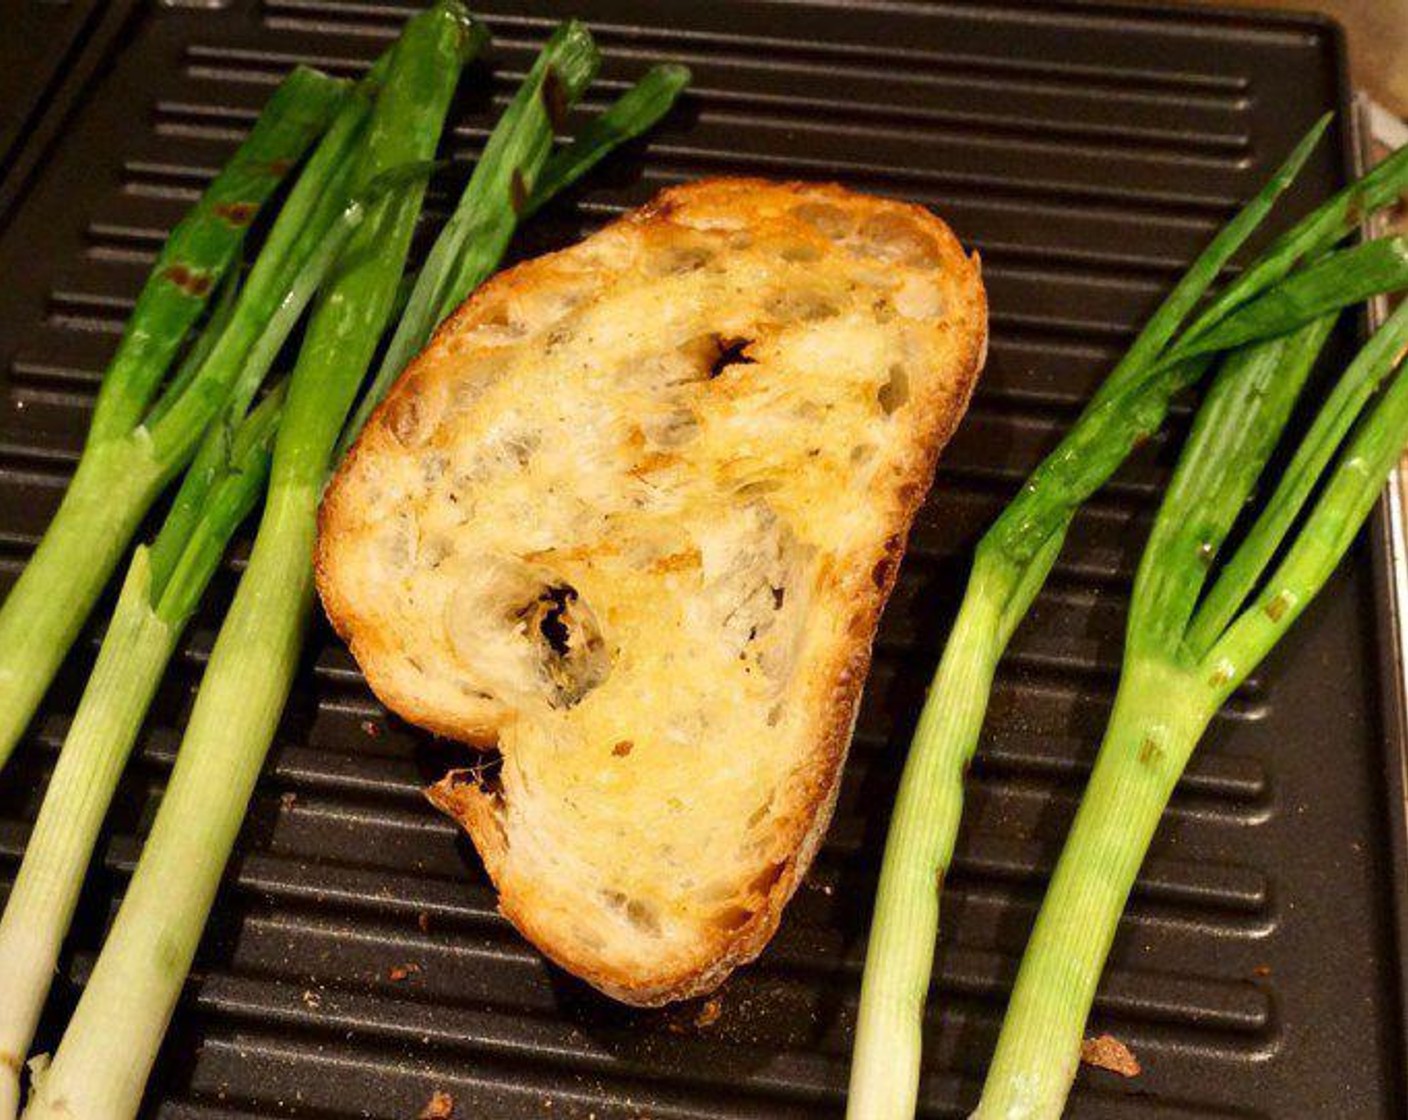 step 1 Drizzle Ciabatta Bread (8 slices) with Extra-Virgin Olive Oil (1/4 cup) and toast (or grill) the bread until golden or grill marks appear. If you want to add the scallions, grill Scallion (1 bunch) as well until starting to wilt and char.